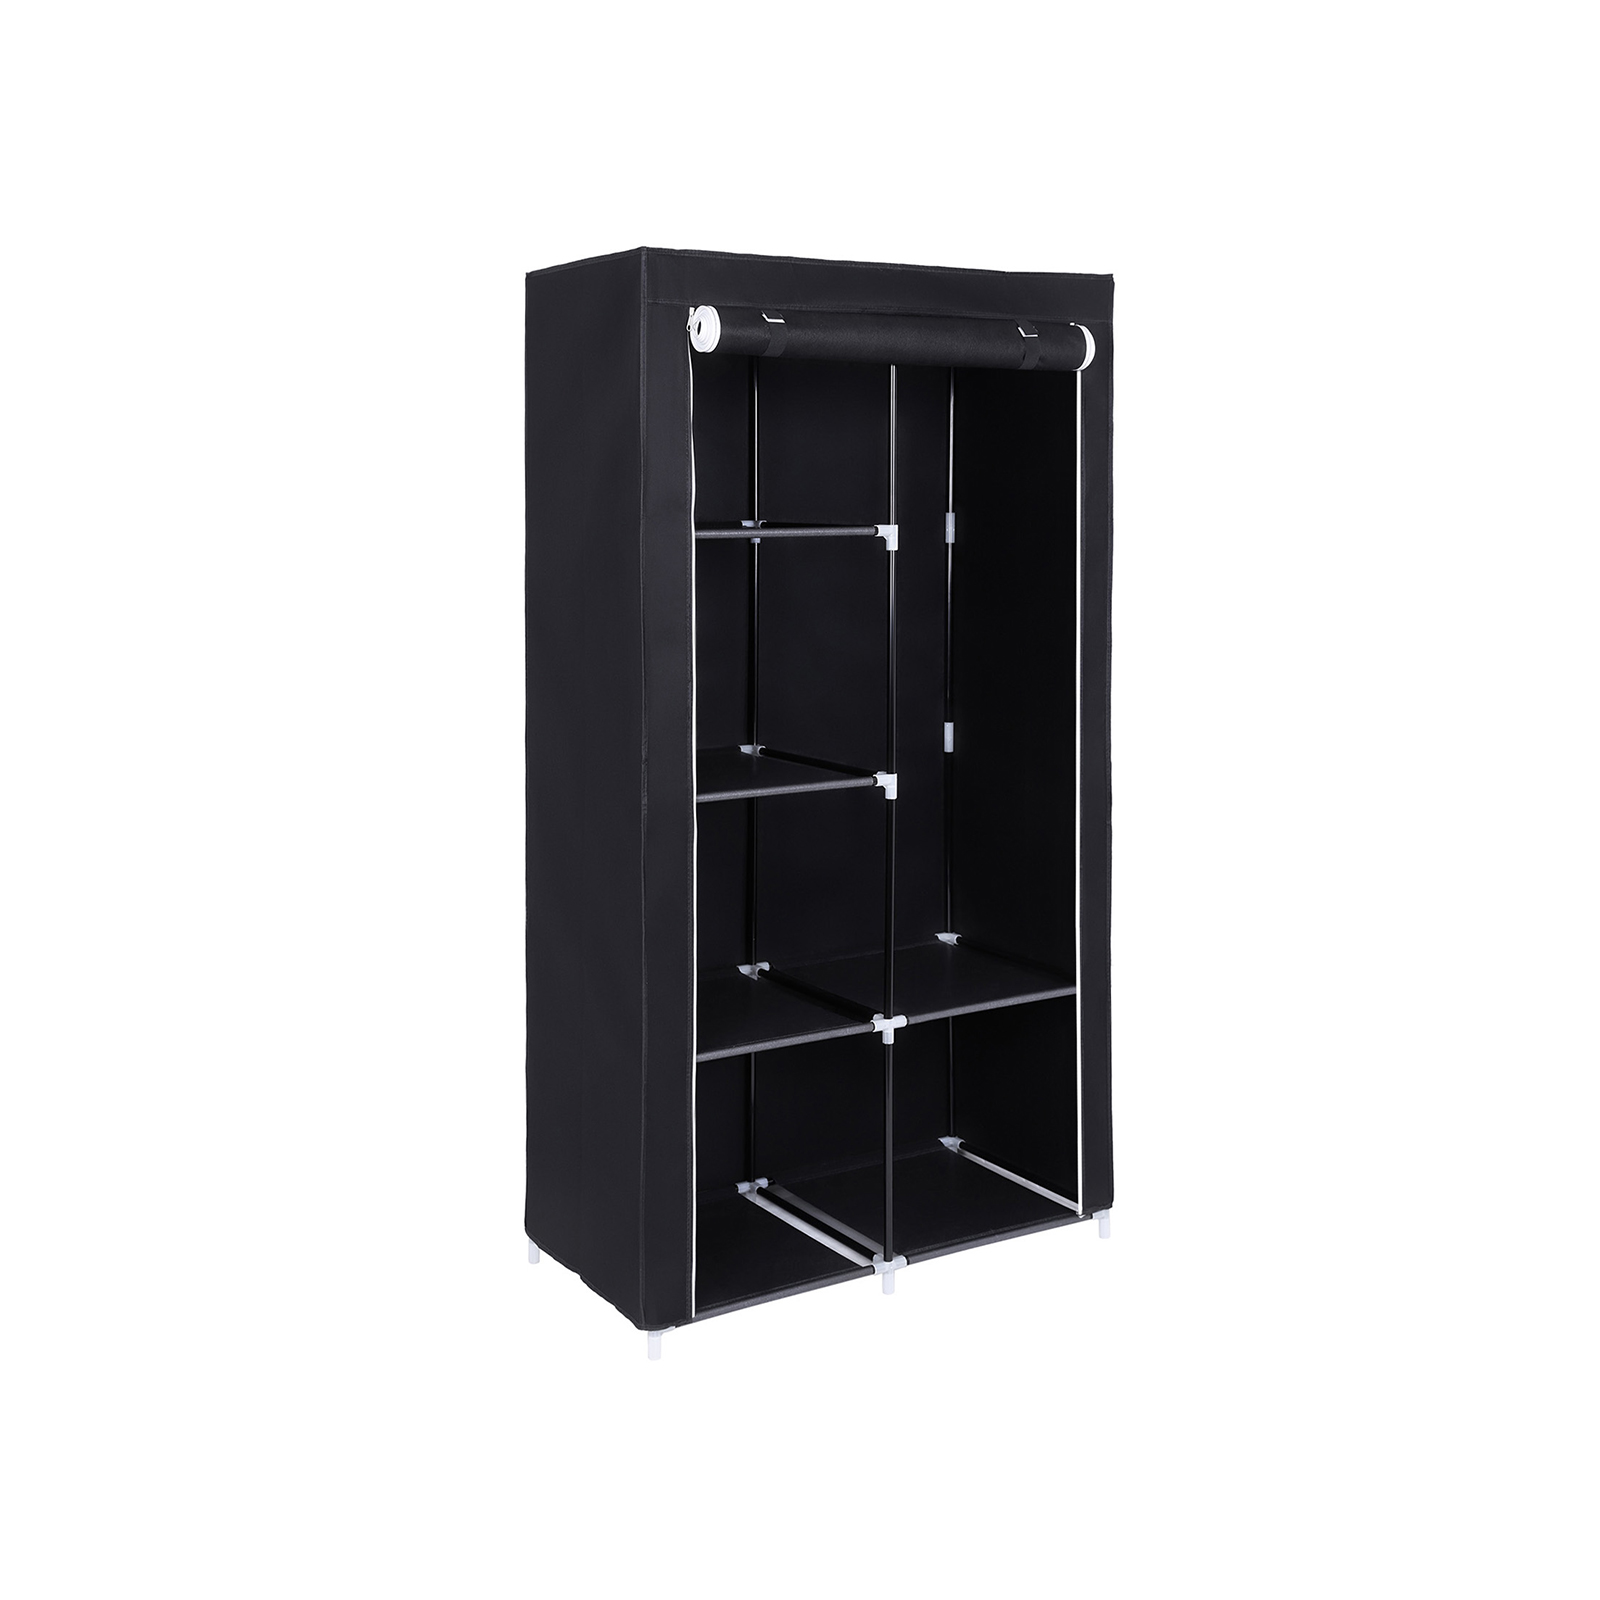 Clothes Storage Organiser Portable,A HUJUNG Canvas Wardrobe with Shelving And Hanging Rail Bedroom Furniture Home 